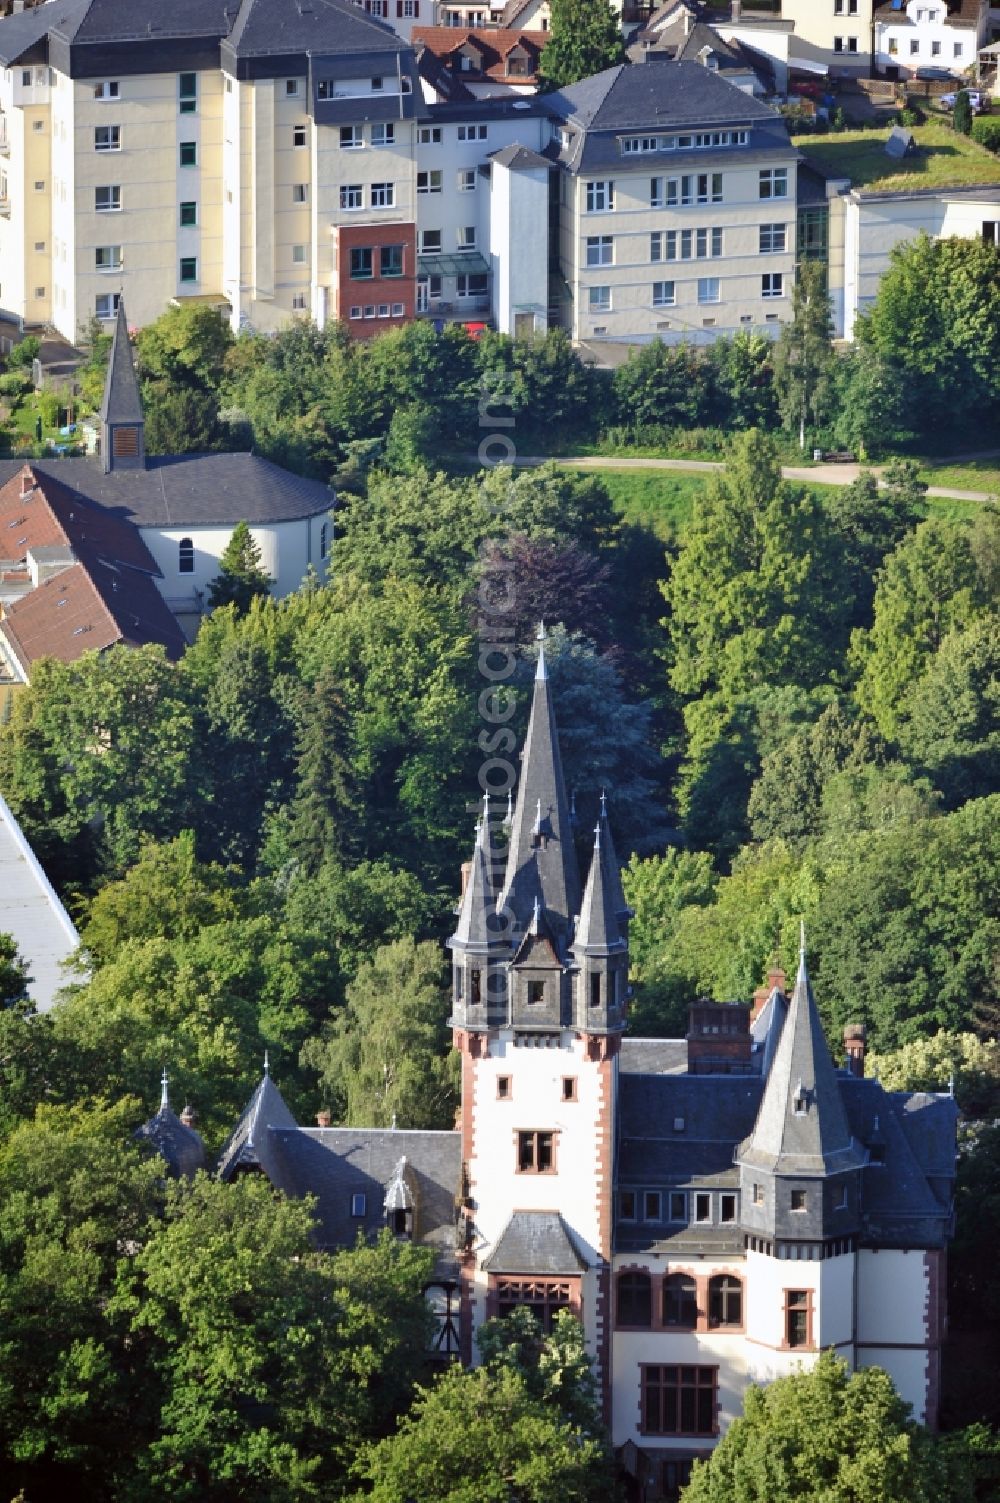 Aerial photograph KÖNIGSSTEIN - View of the Villa Andreae in Königstein im Taunus. A monument that will be used as a residential and office buildings. The villa has at times been the headquarters of real estate businessman Utz Jurgen Schneider. The building was known as a film set for Hanni & Nanni